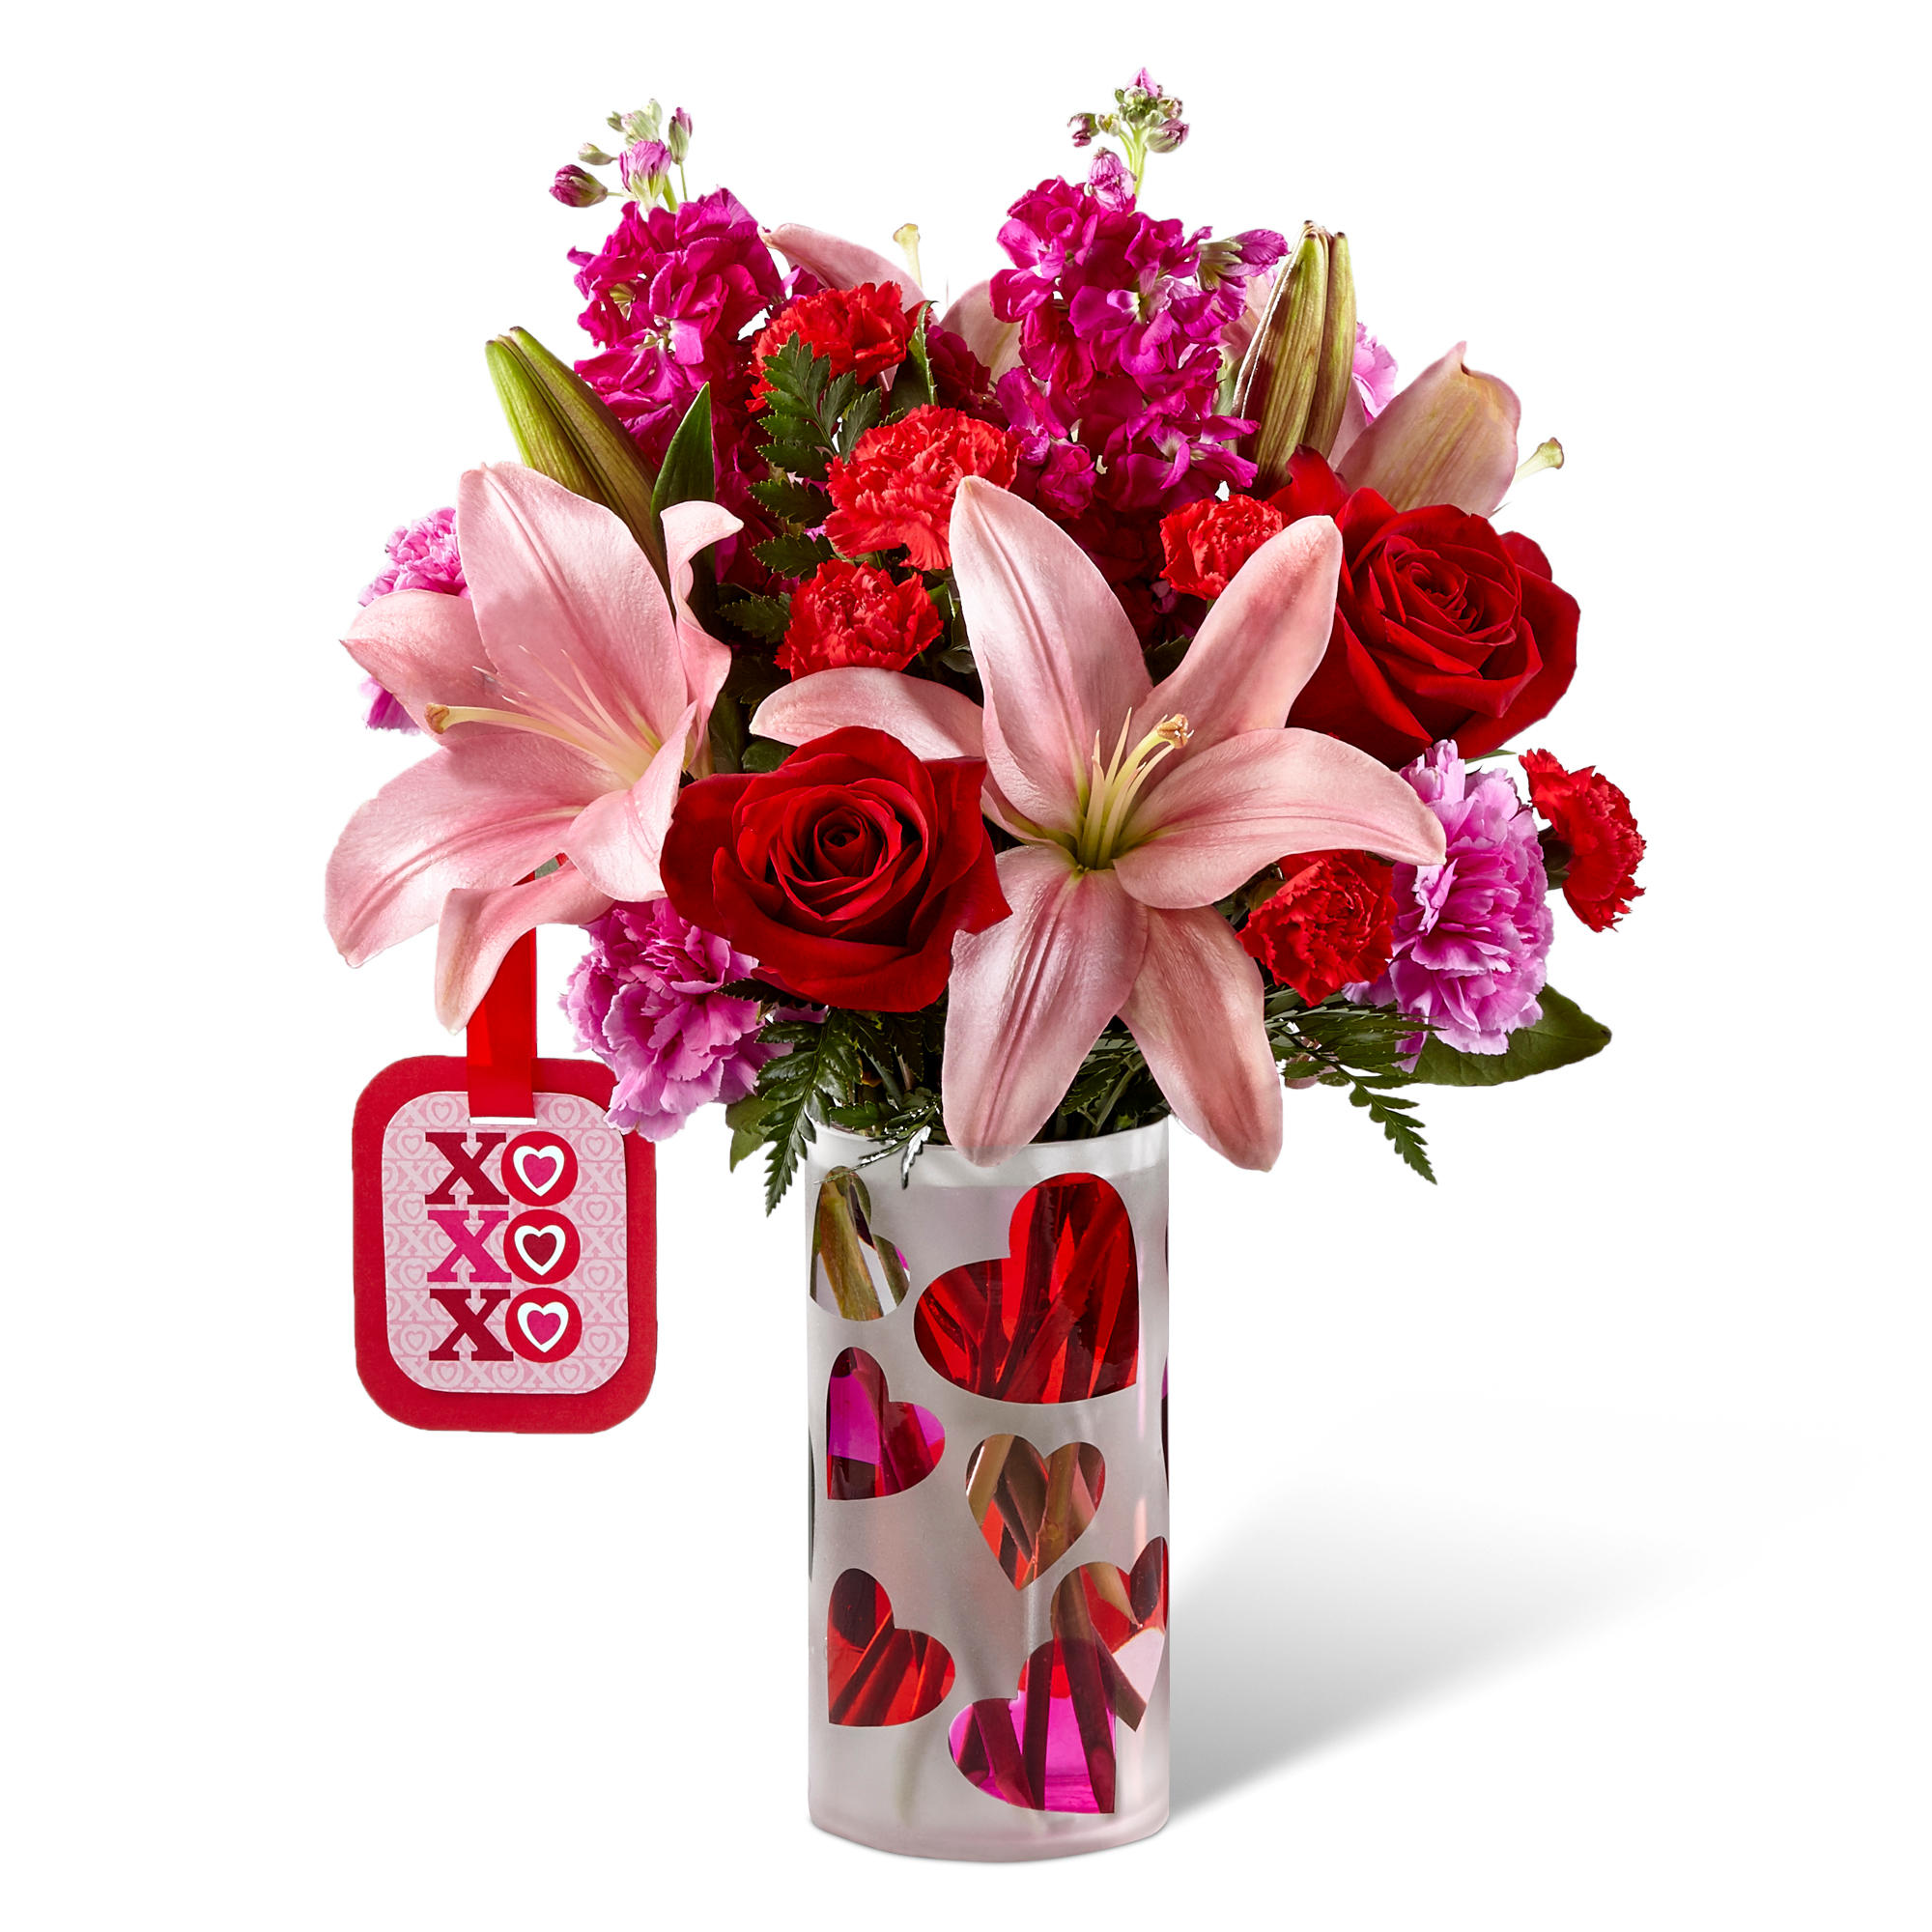 Bring the joy of fresh flowers to every occasion.